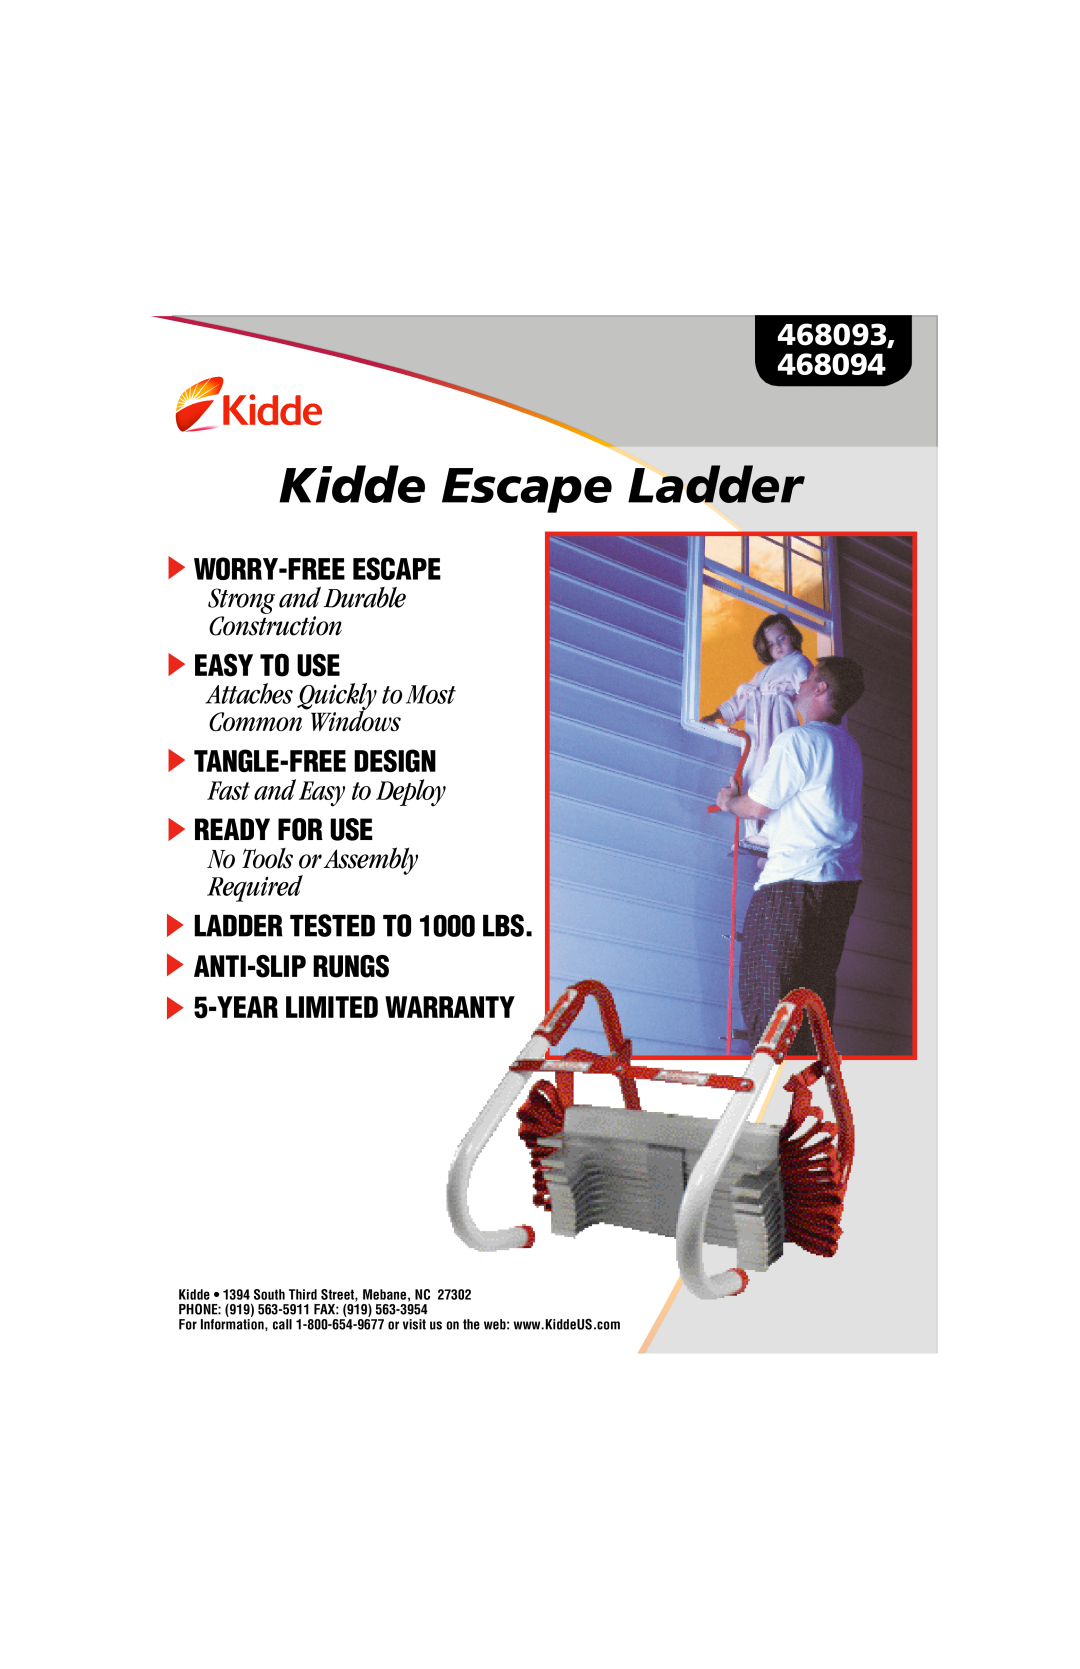 Kidde 468094 warranty Kidde Escape Ladder, 468093, Worry-Freeescape, Strong and Durable Construction, Easy To Use 